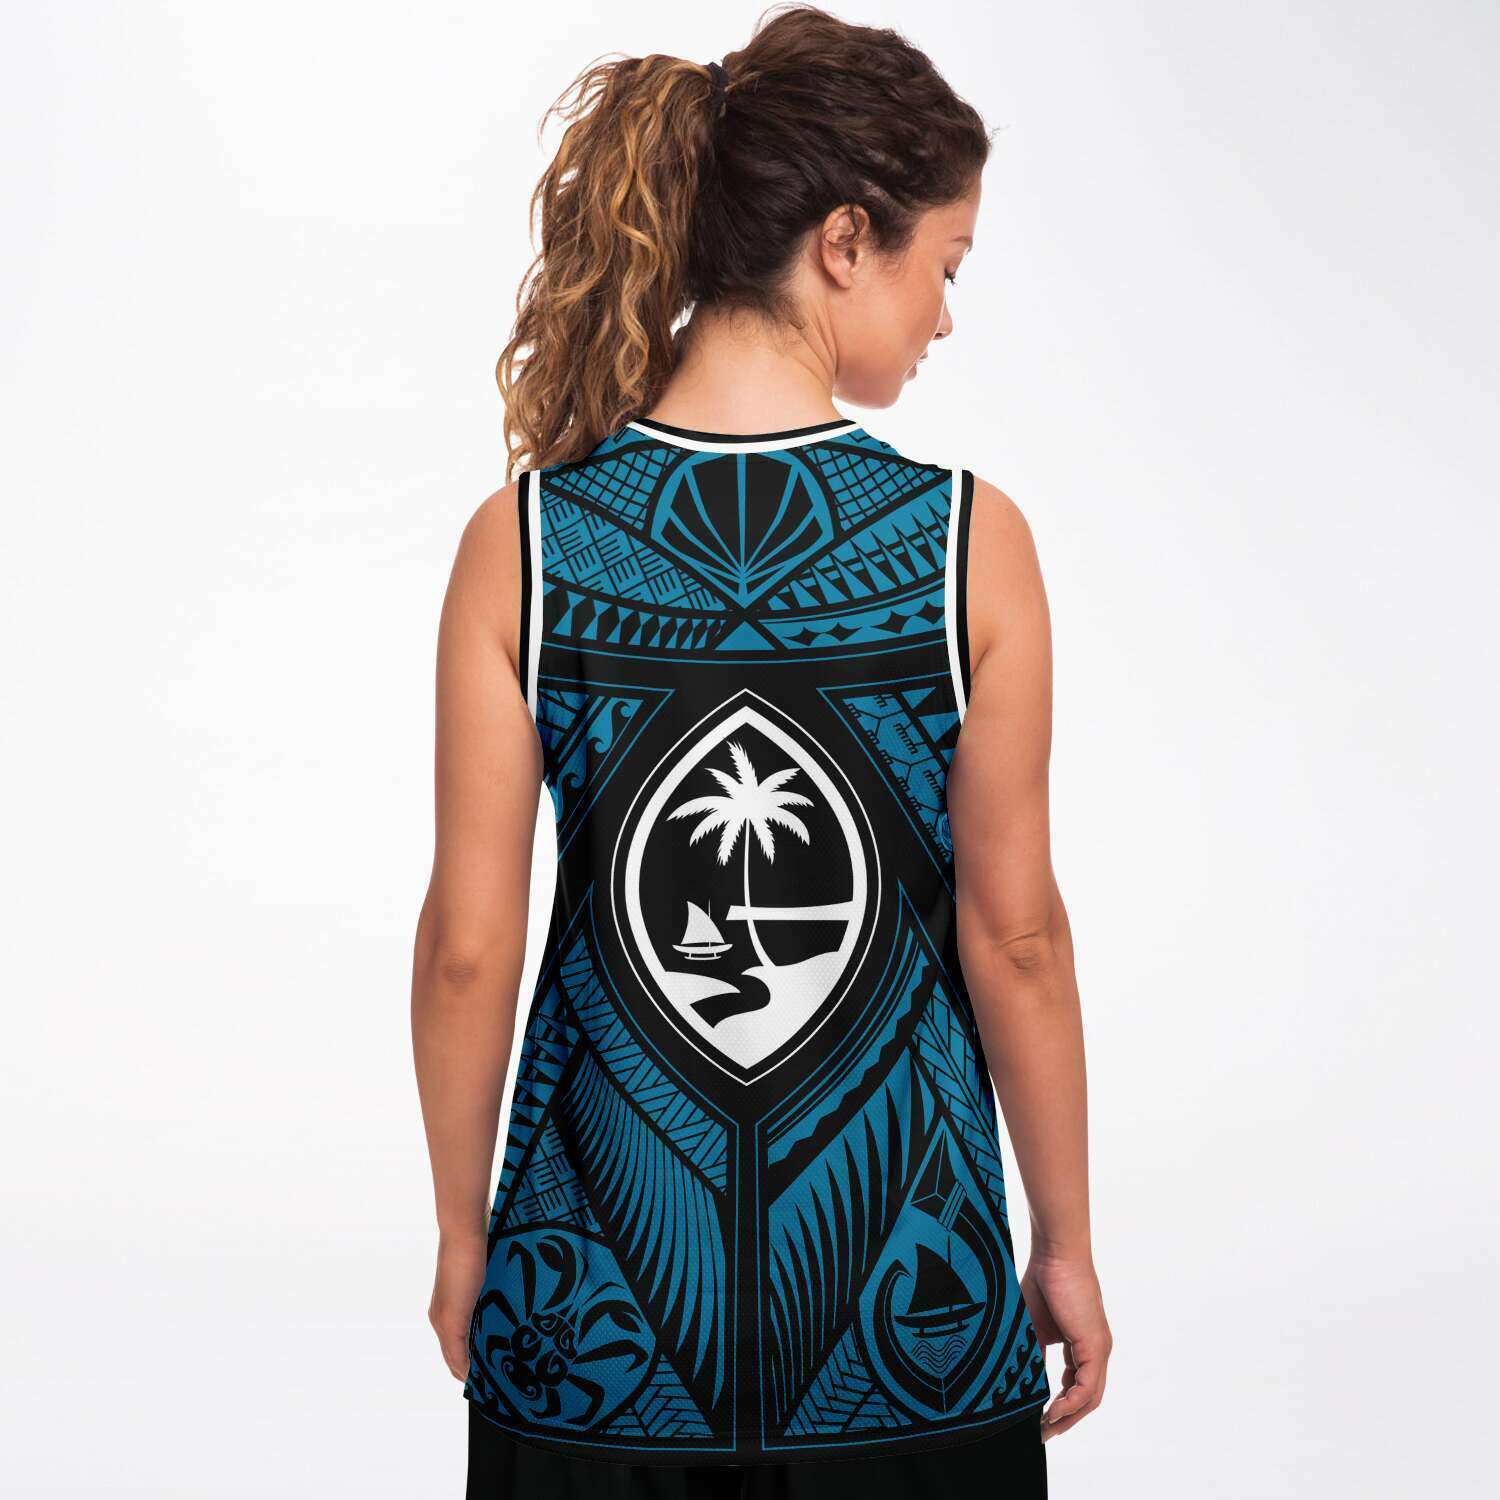 TEAL TRIBAL POLY FEST BASKETBALL JERSEY – Hawaii's Finest